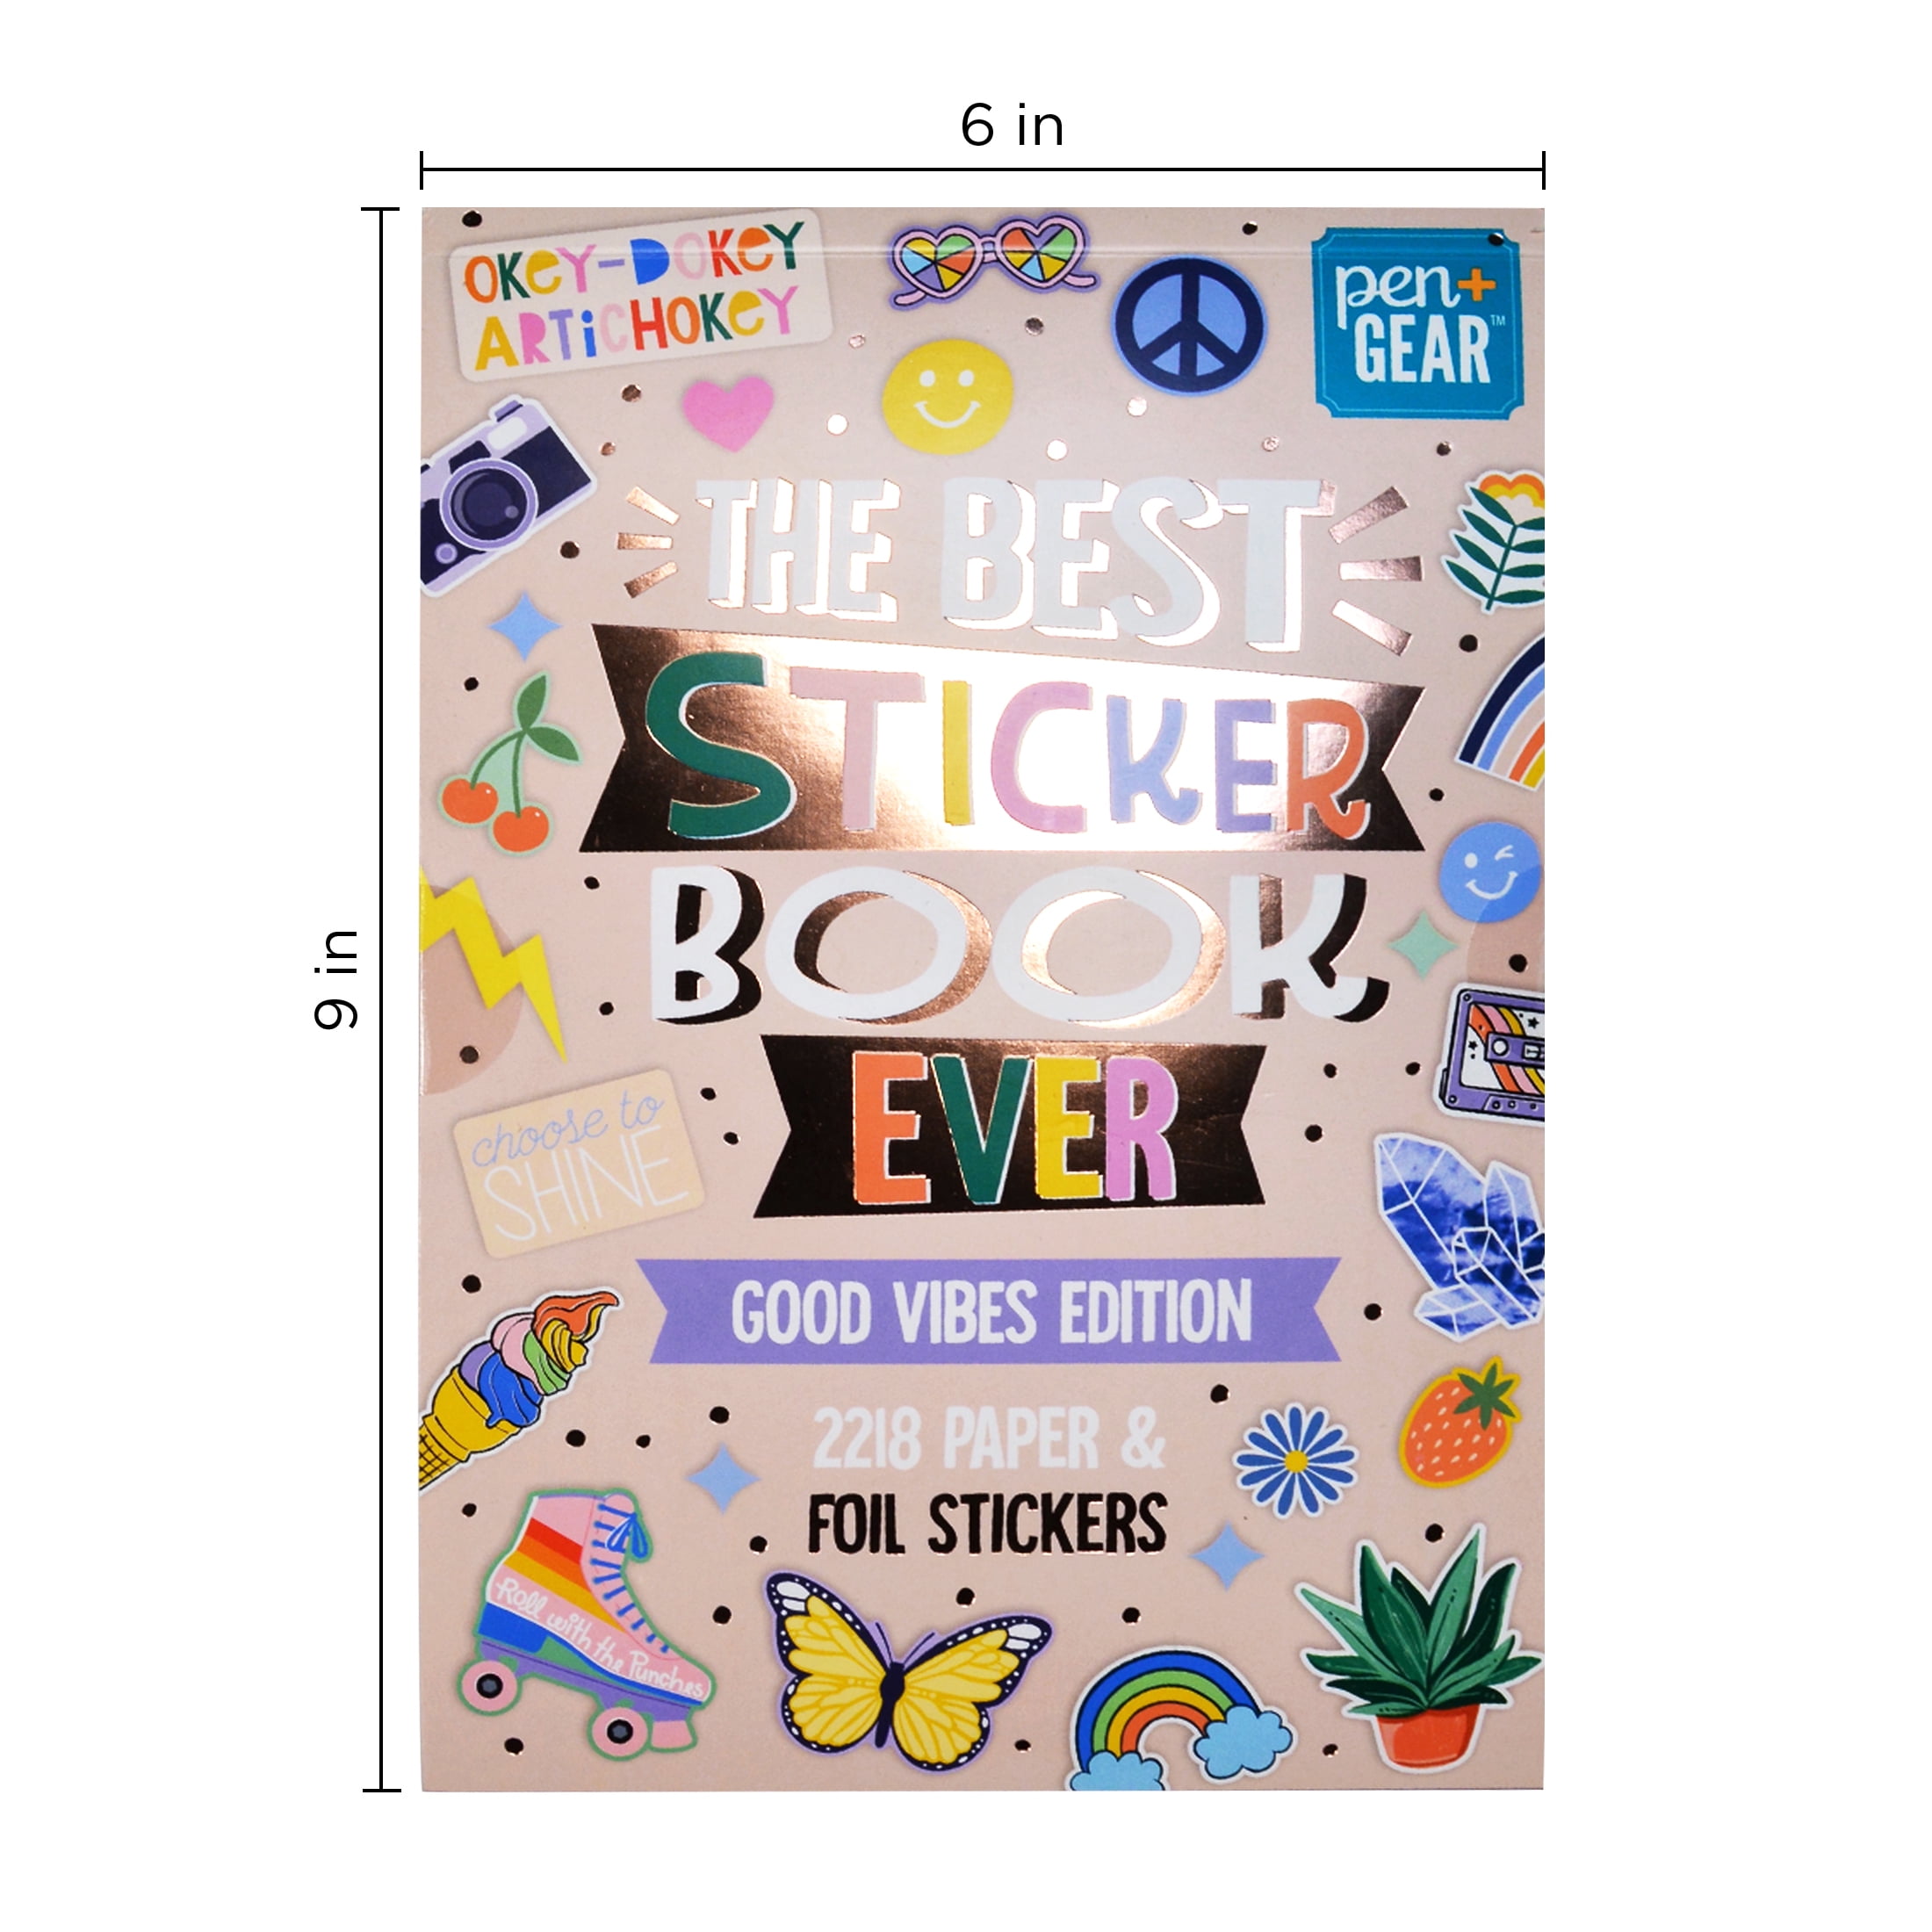 Pen+gear 40 Pages Good Vibes Edition The Best Sticker Book Ever - 1 Each